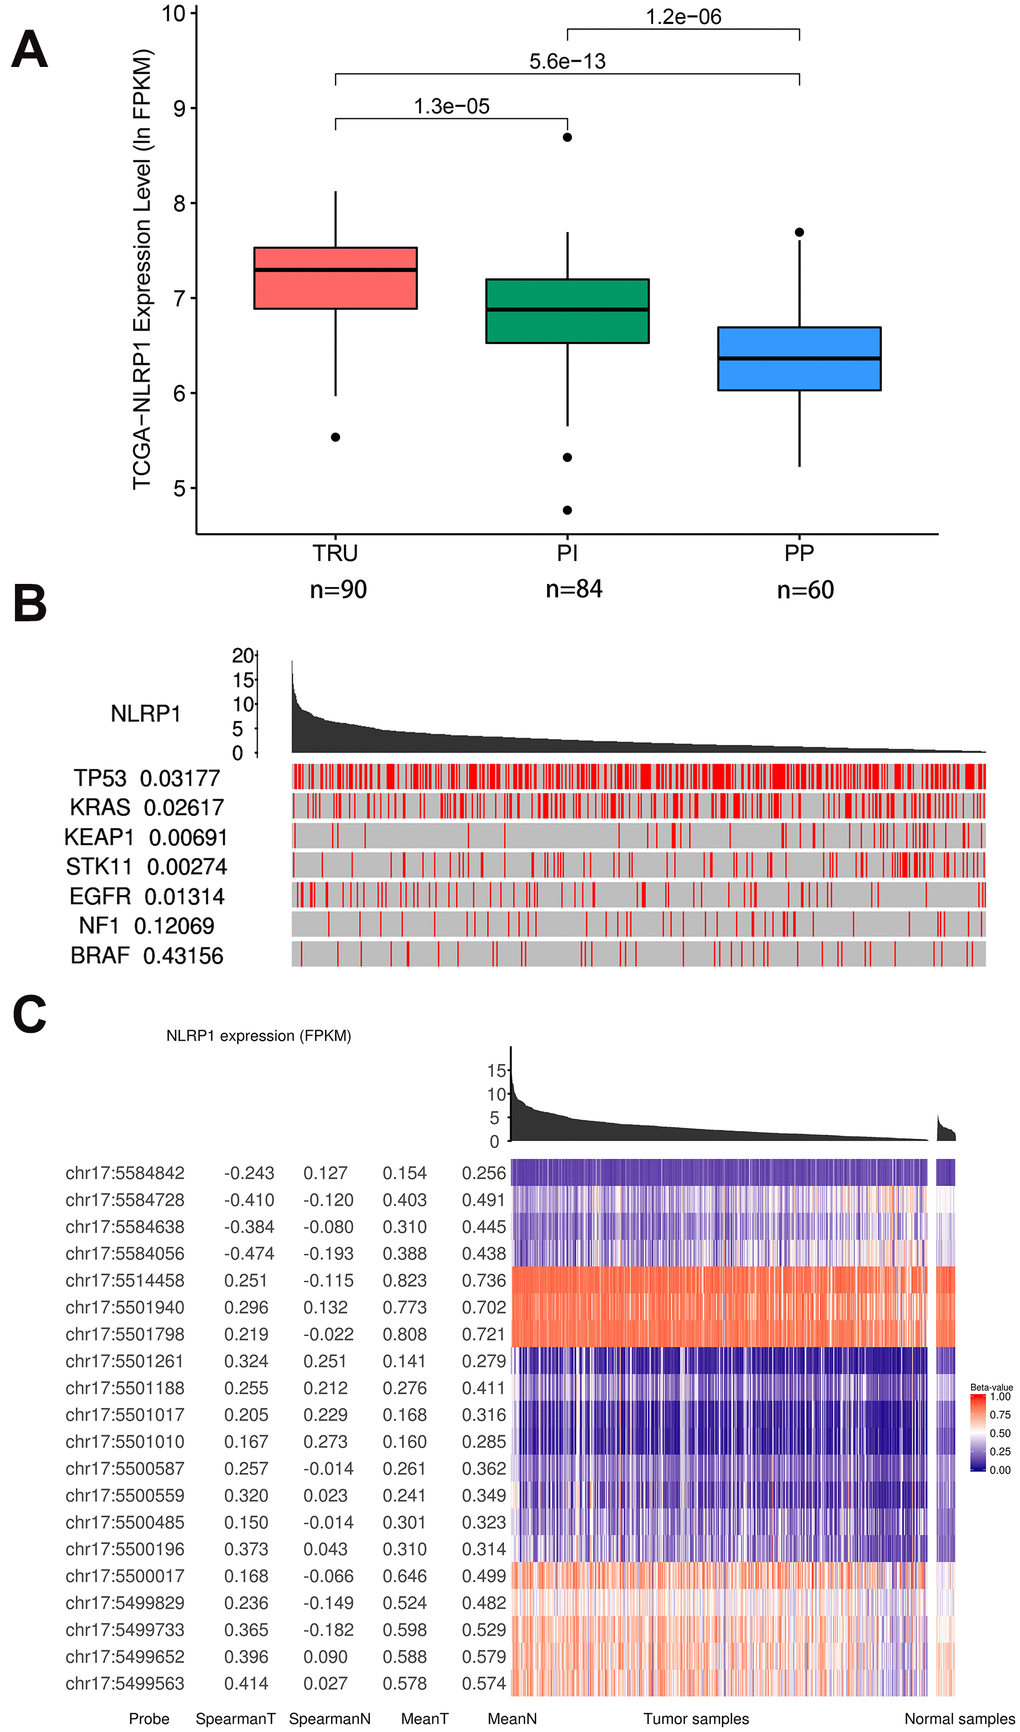 Relations of NLRP1 expression with other parameters (TCGAportal). (A) NLRP1 expression in the new different subgroups of LUAD. The subgroup of PP had a significantly lower expression level. (B) The mutation status of several cancer-related genes with high mutation probabilities in LUAD correlated highly with the expression of NLRP1. (C) The methylation levels at multiple sites on chromosome 17 correlated highly with NLRP1 expression. TRU, terminal respiratory unit; PI, proximal inflammatory; PP, proximal proliferative; chr 17, chromosome 17.